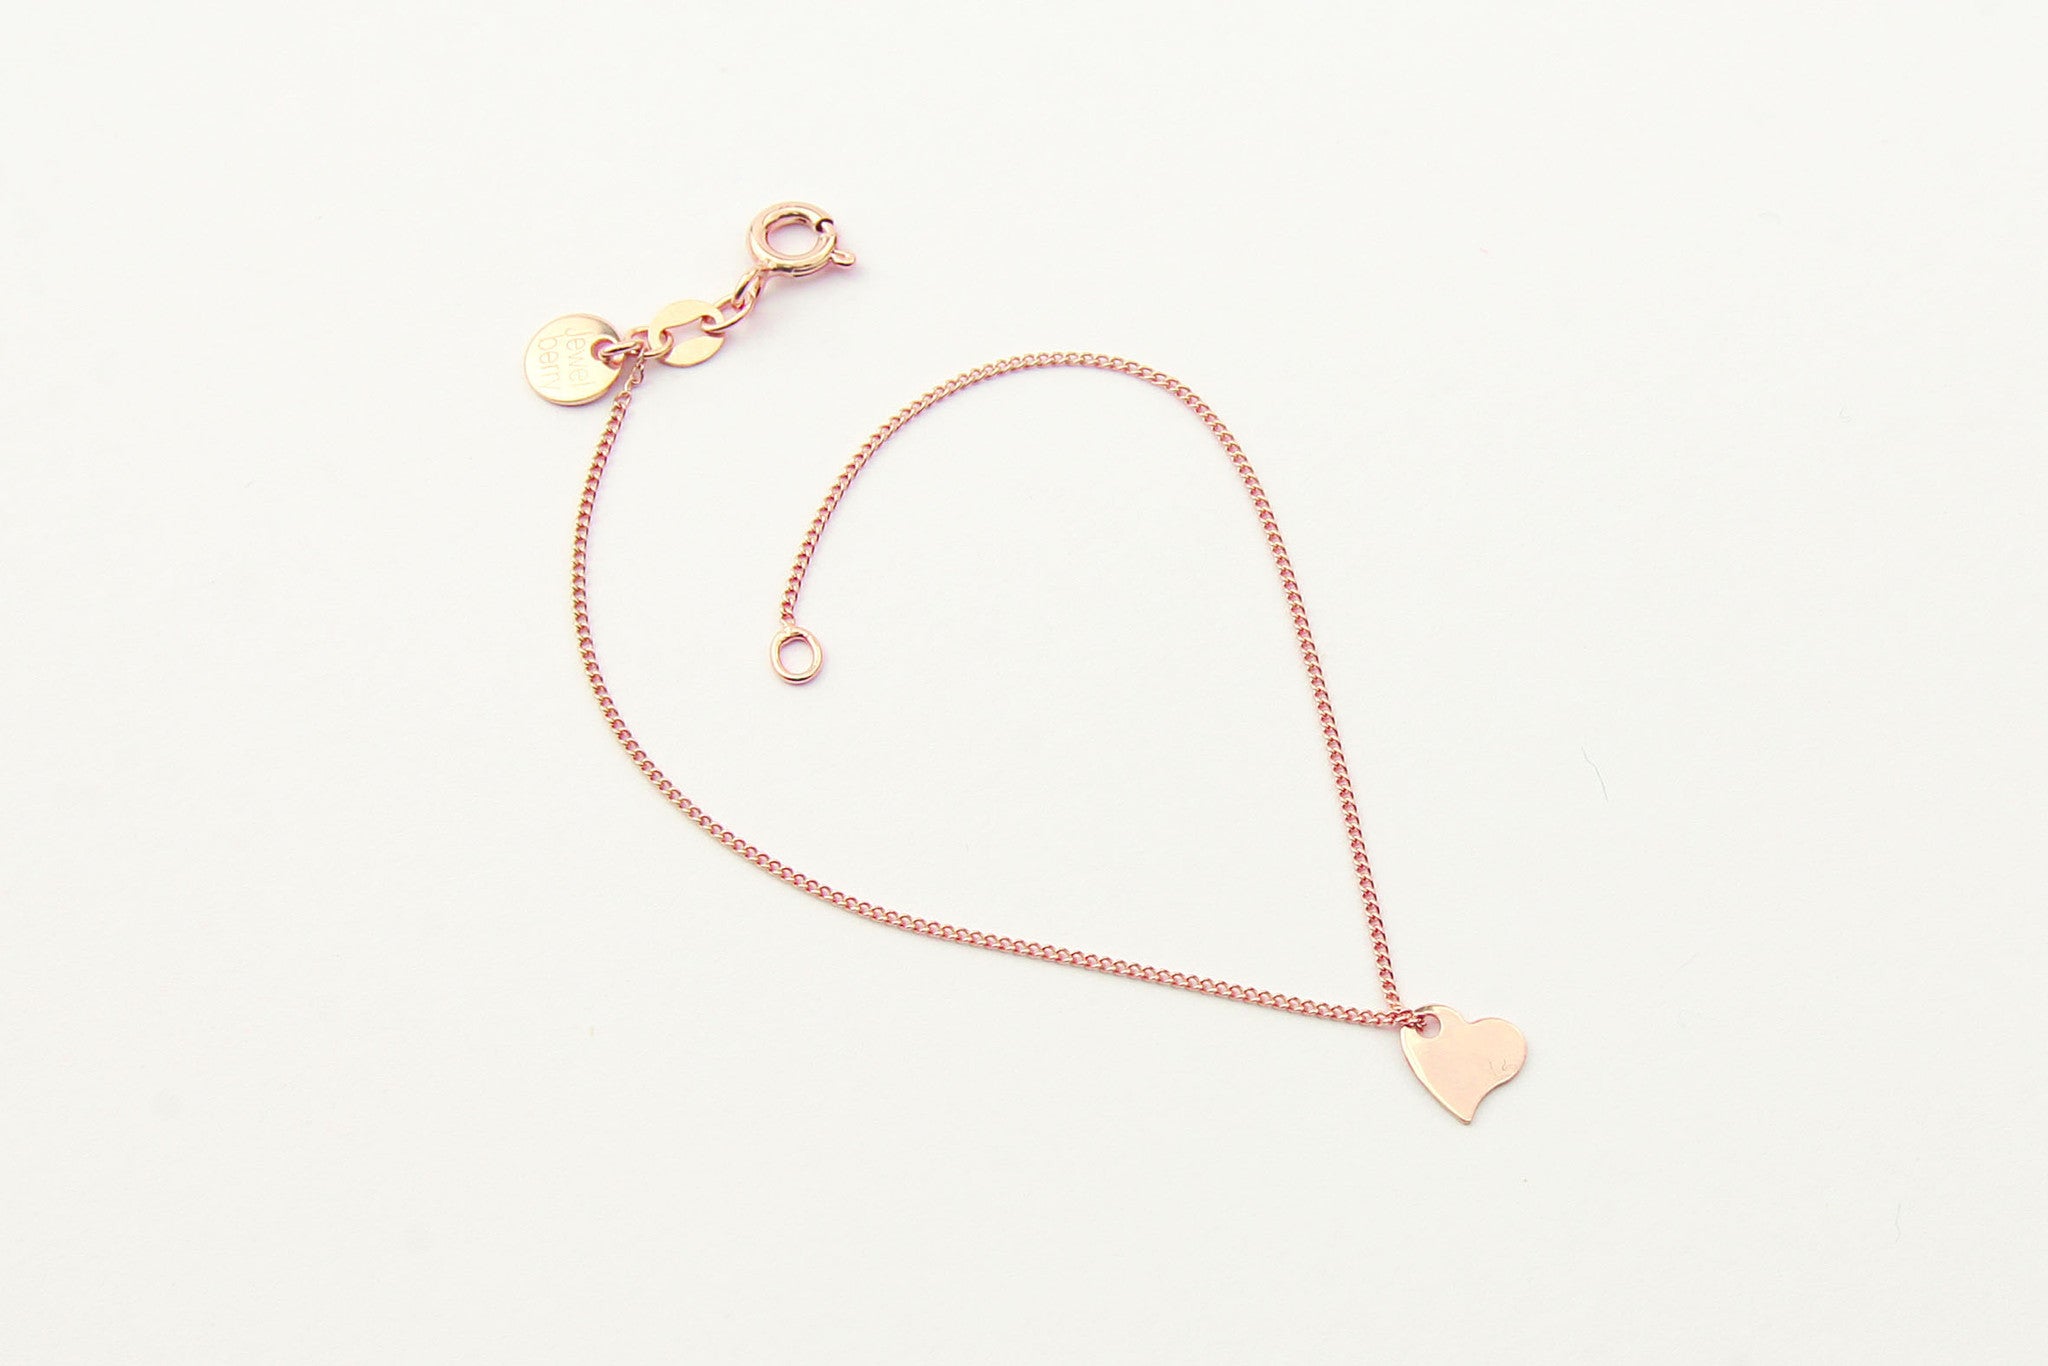 jewelberry armband bracelet my love rose gold plated sterling silver fine jewelry handmade with love fairtrade curb chain